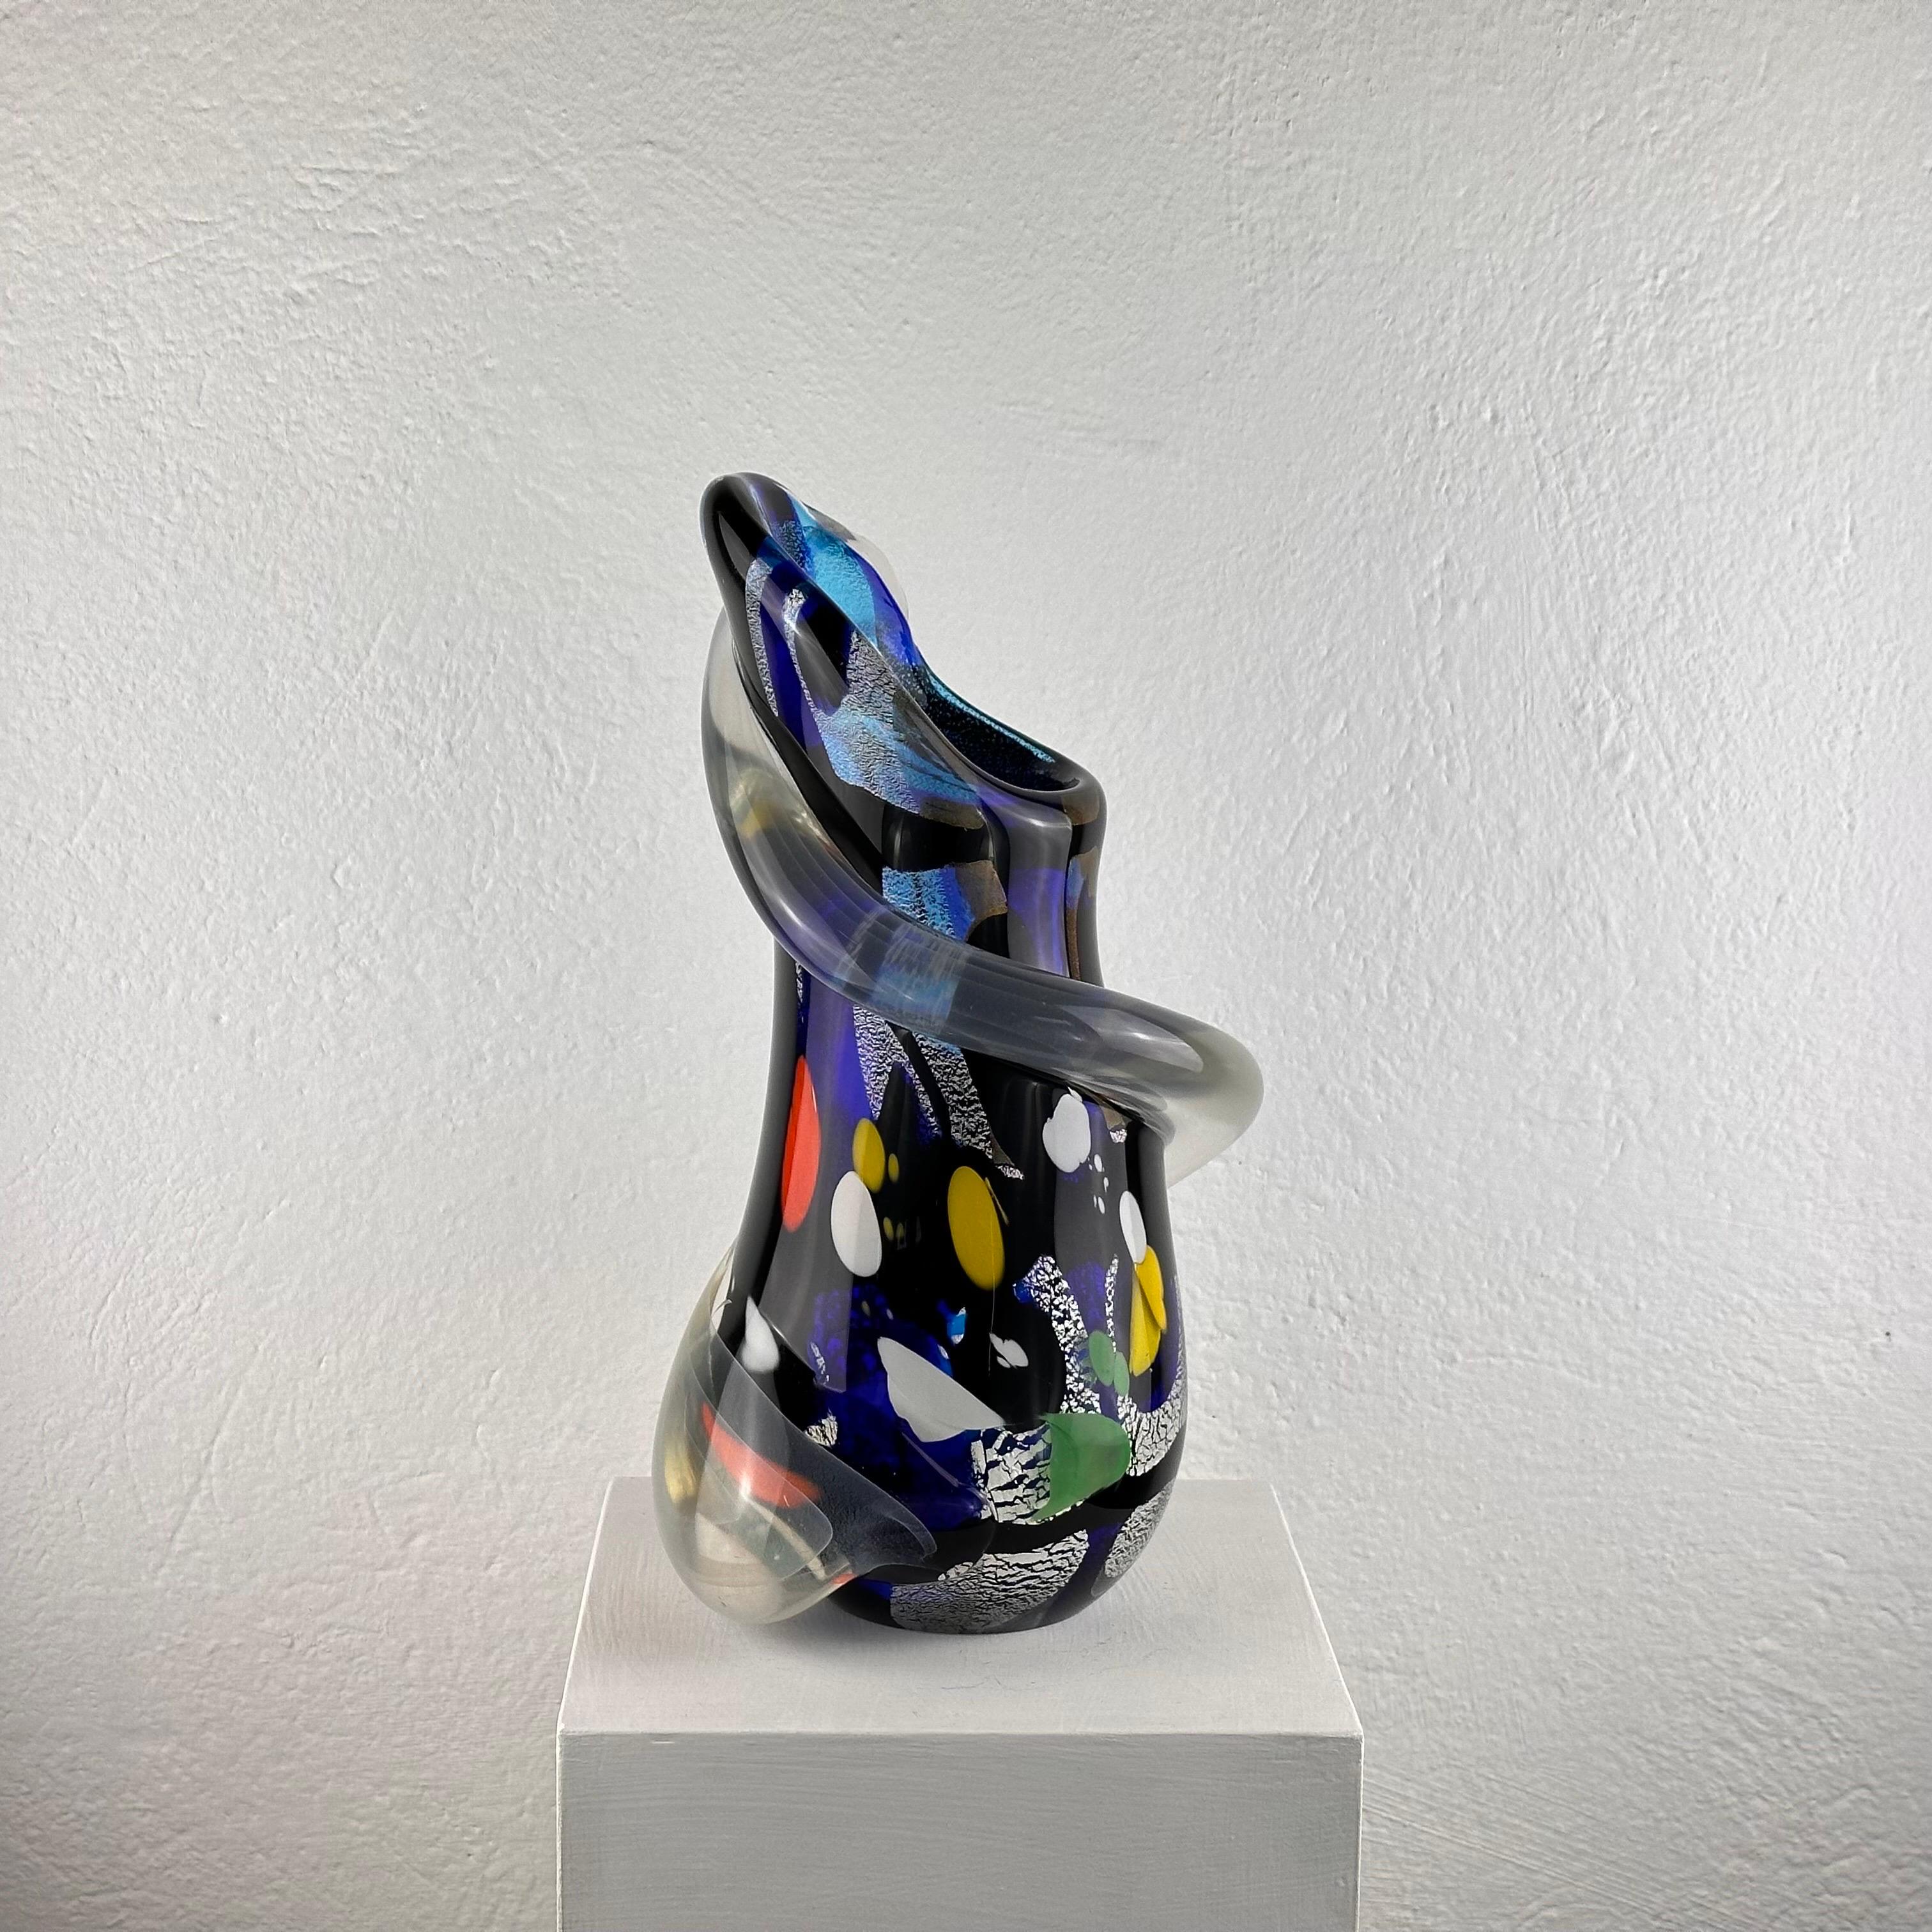 Mid-Century Modern Exquisite Abstract Murano Glass Vase by S. Toso, Signed 1970s Masterpiece For Sale